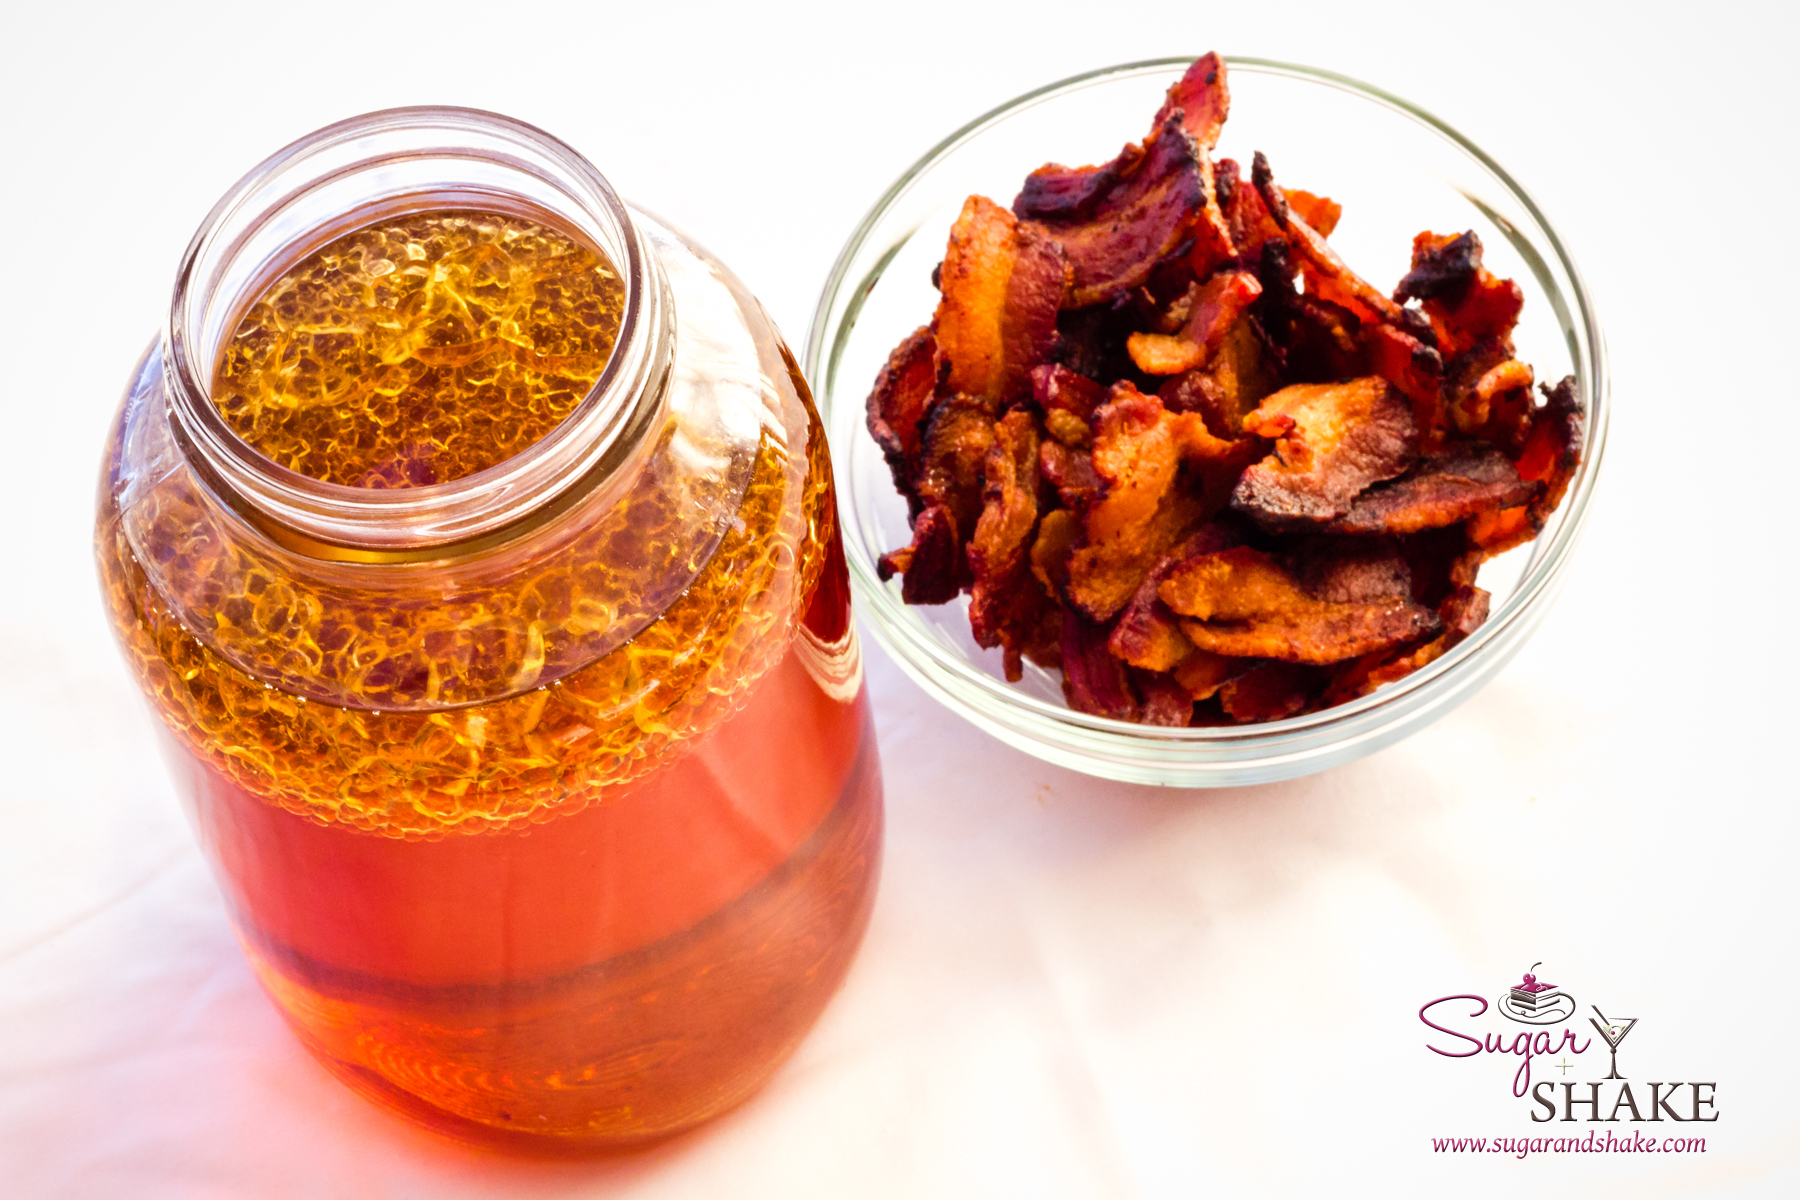 Part of The Great Bacon Bourbon Project. © 2013 Sugar + Shake